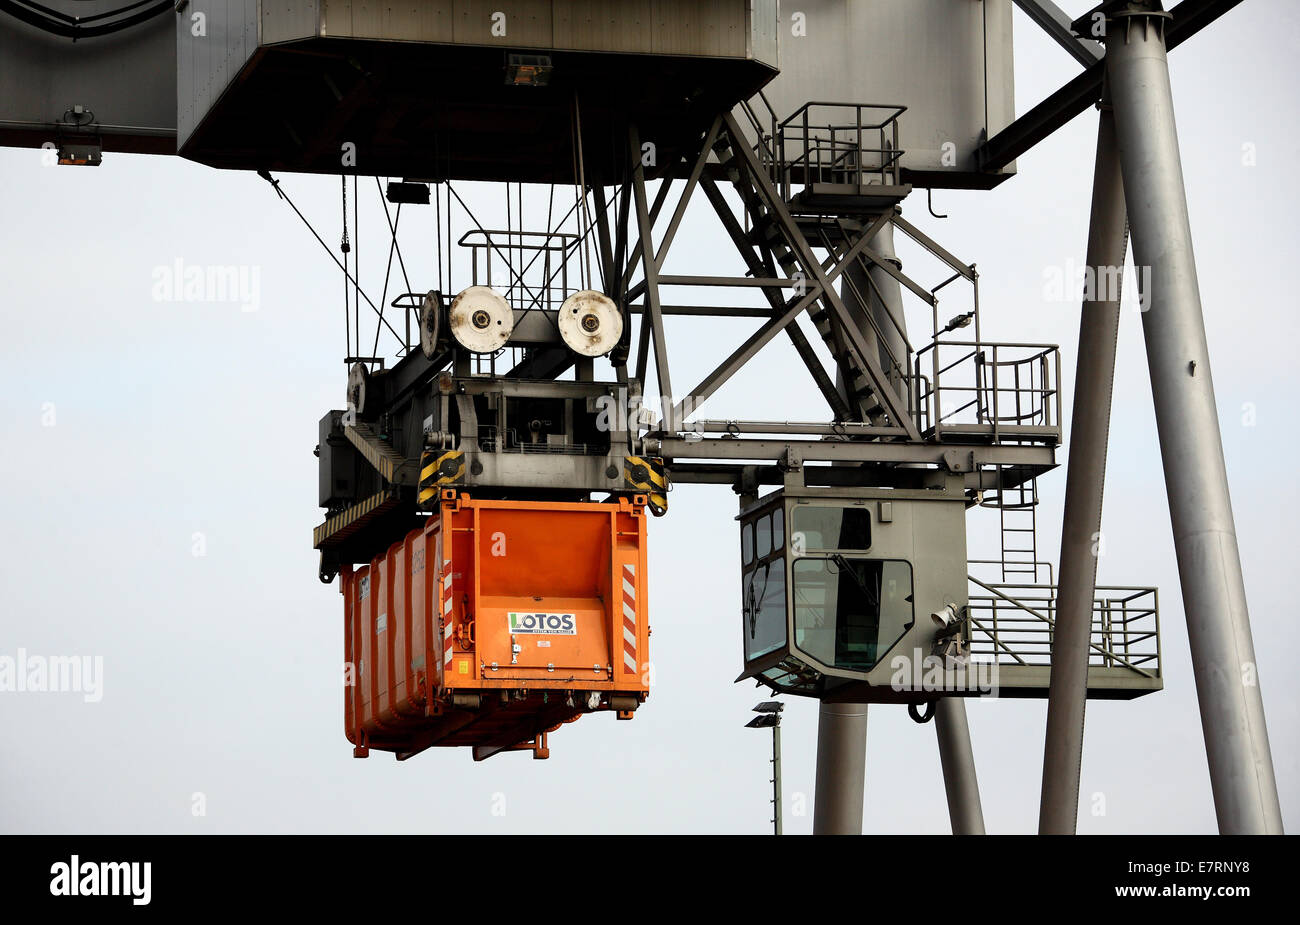 Railroad container terminal with bridge crane and freight cars, Karlsruhe, Germany, Jan. 29, 2009. Stock Photo